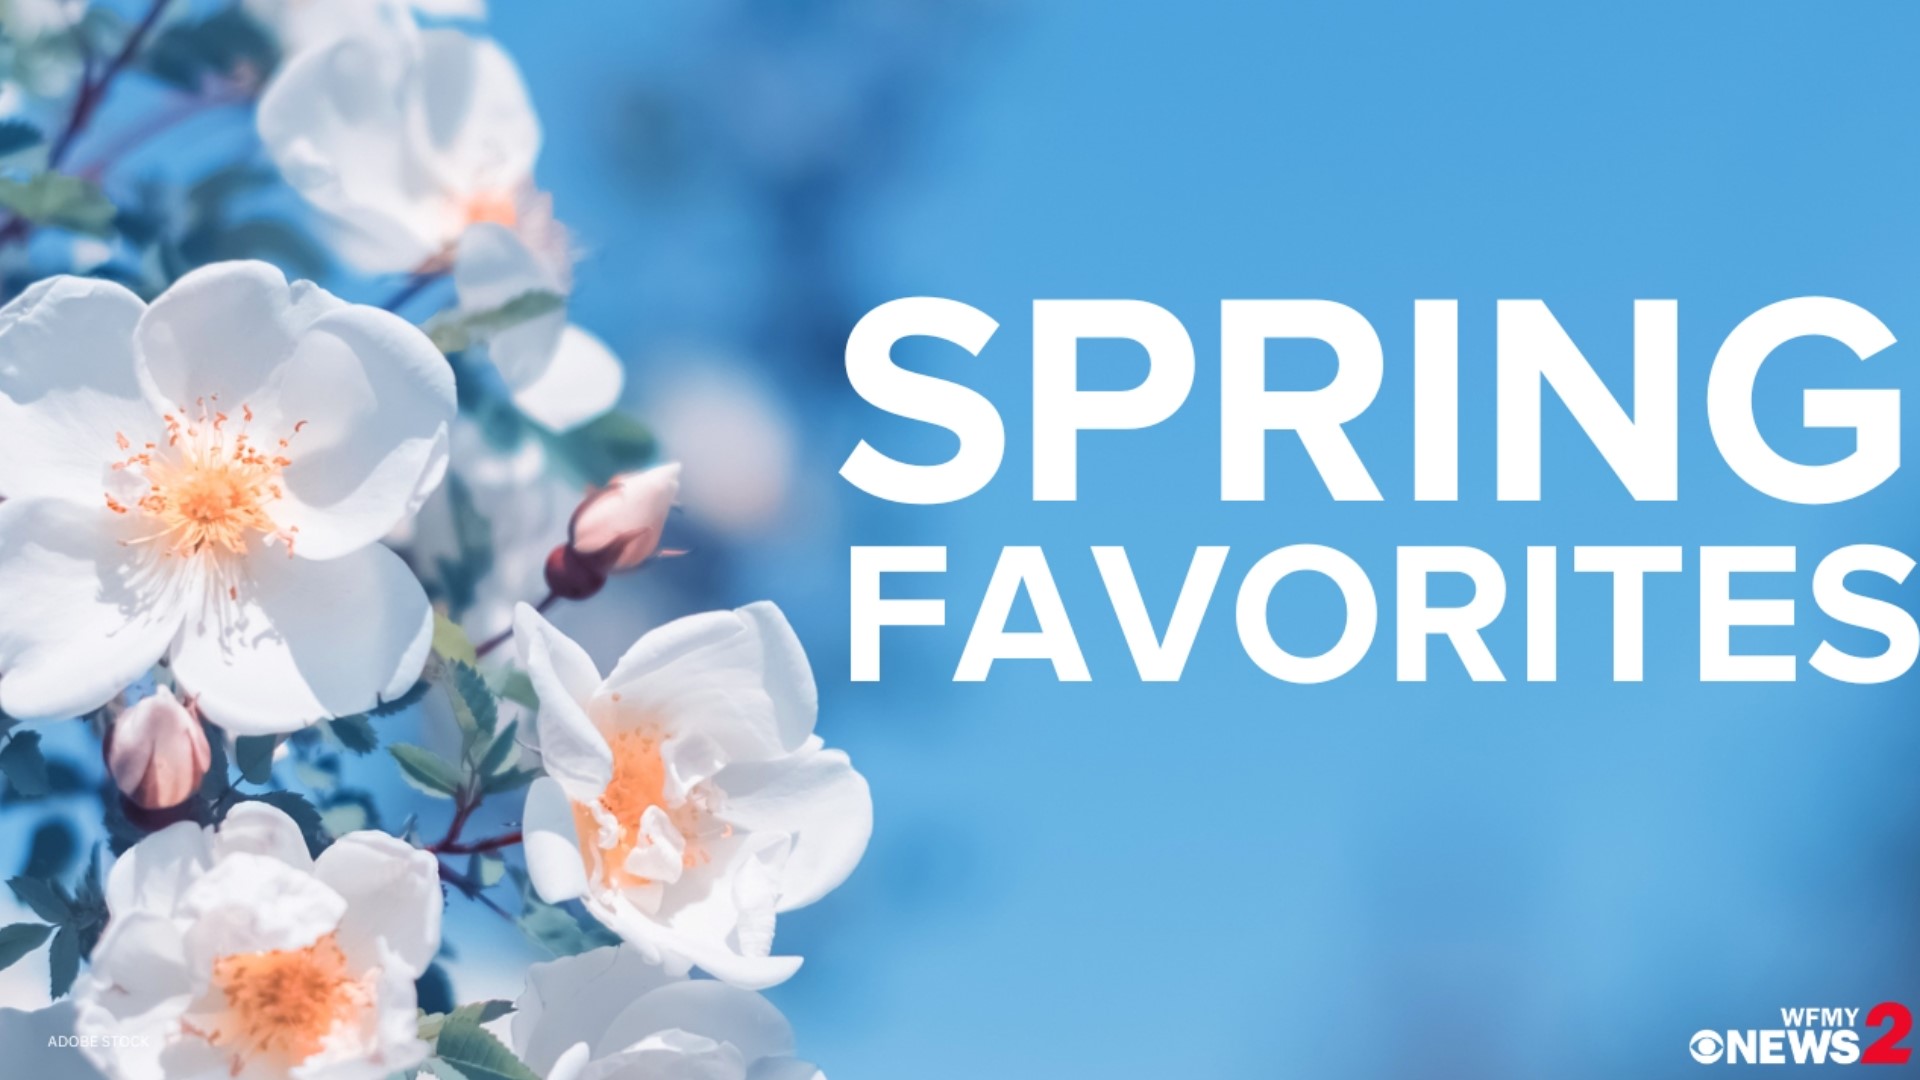 Lauren Coleman shares her favorite things to do during the spring.